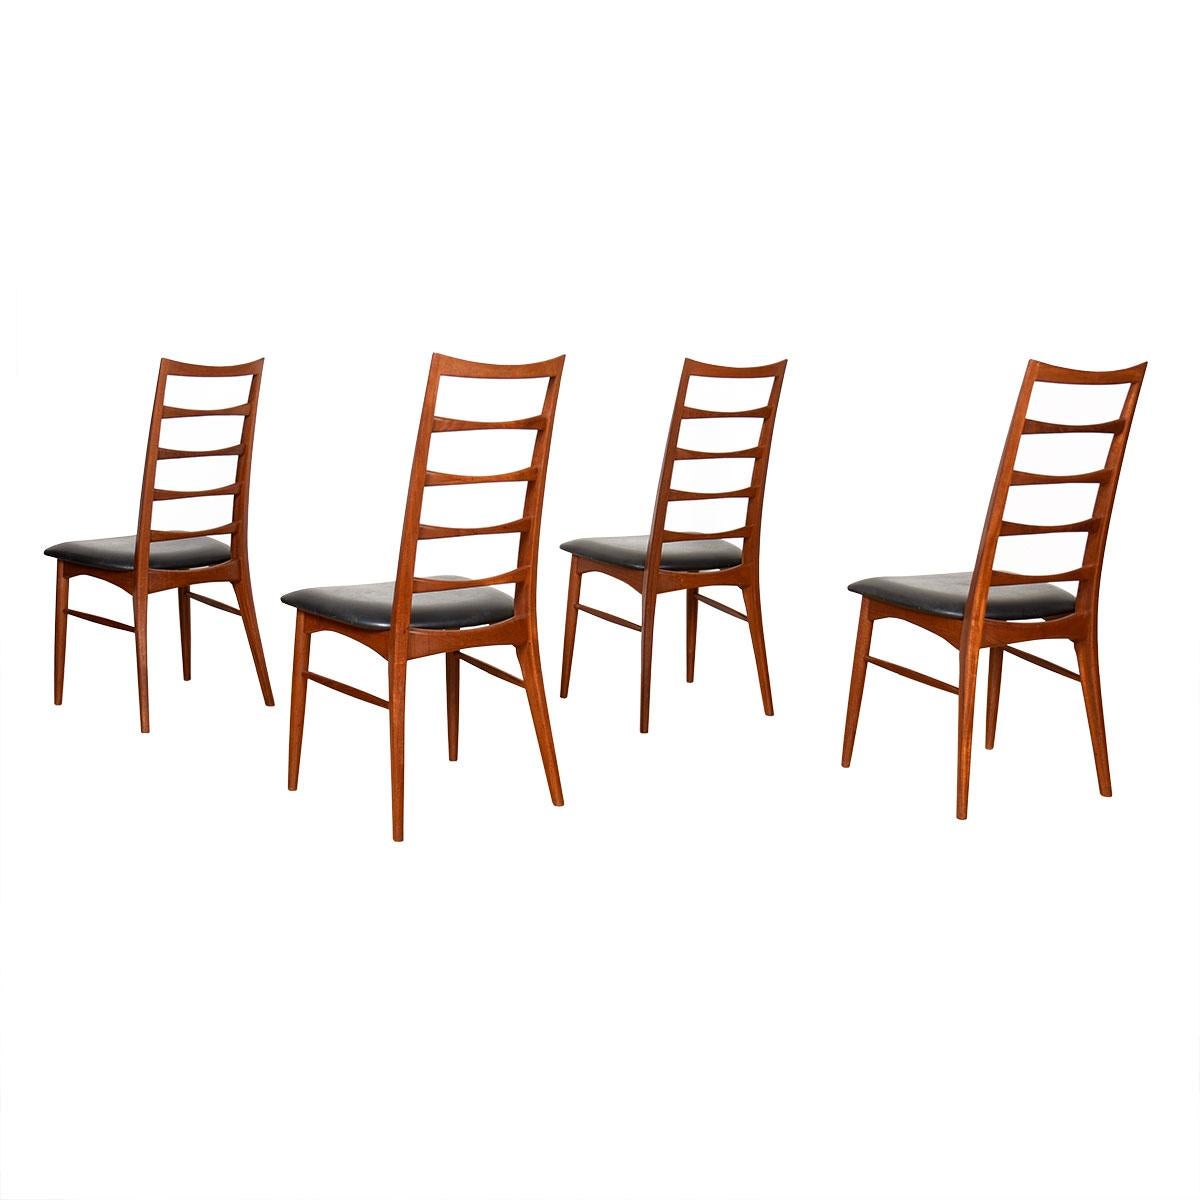 Set of 4 Danish Teak Side Dining Chairs by Koefoeds Hornslet

Additional information:
Material: Teak
Featured at Kensington:
Beautifully proportioned and refined set of teak ladder back chairs from Koefoeds Hornslet. Chairs don’t get much